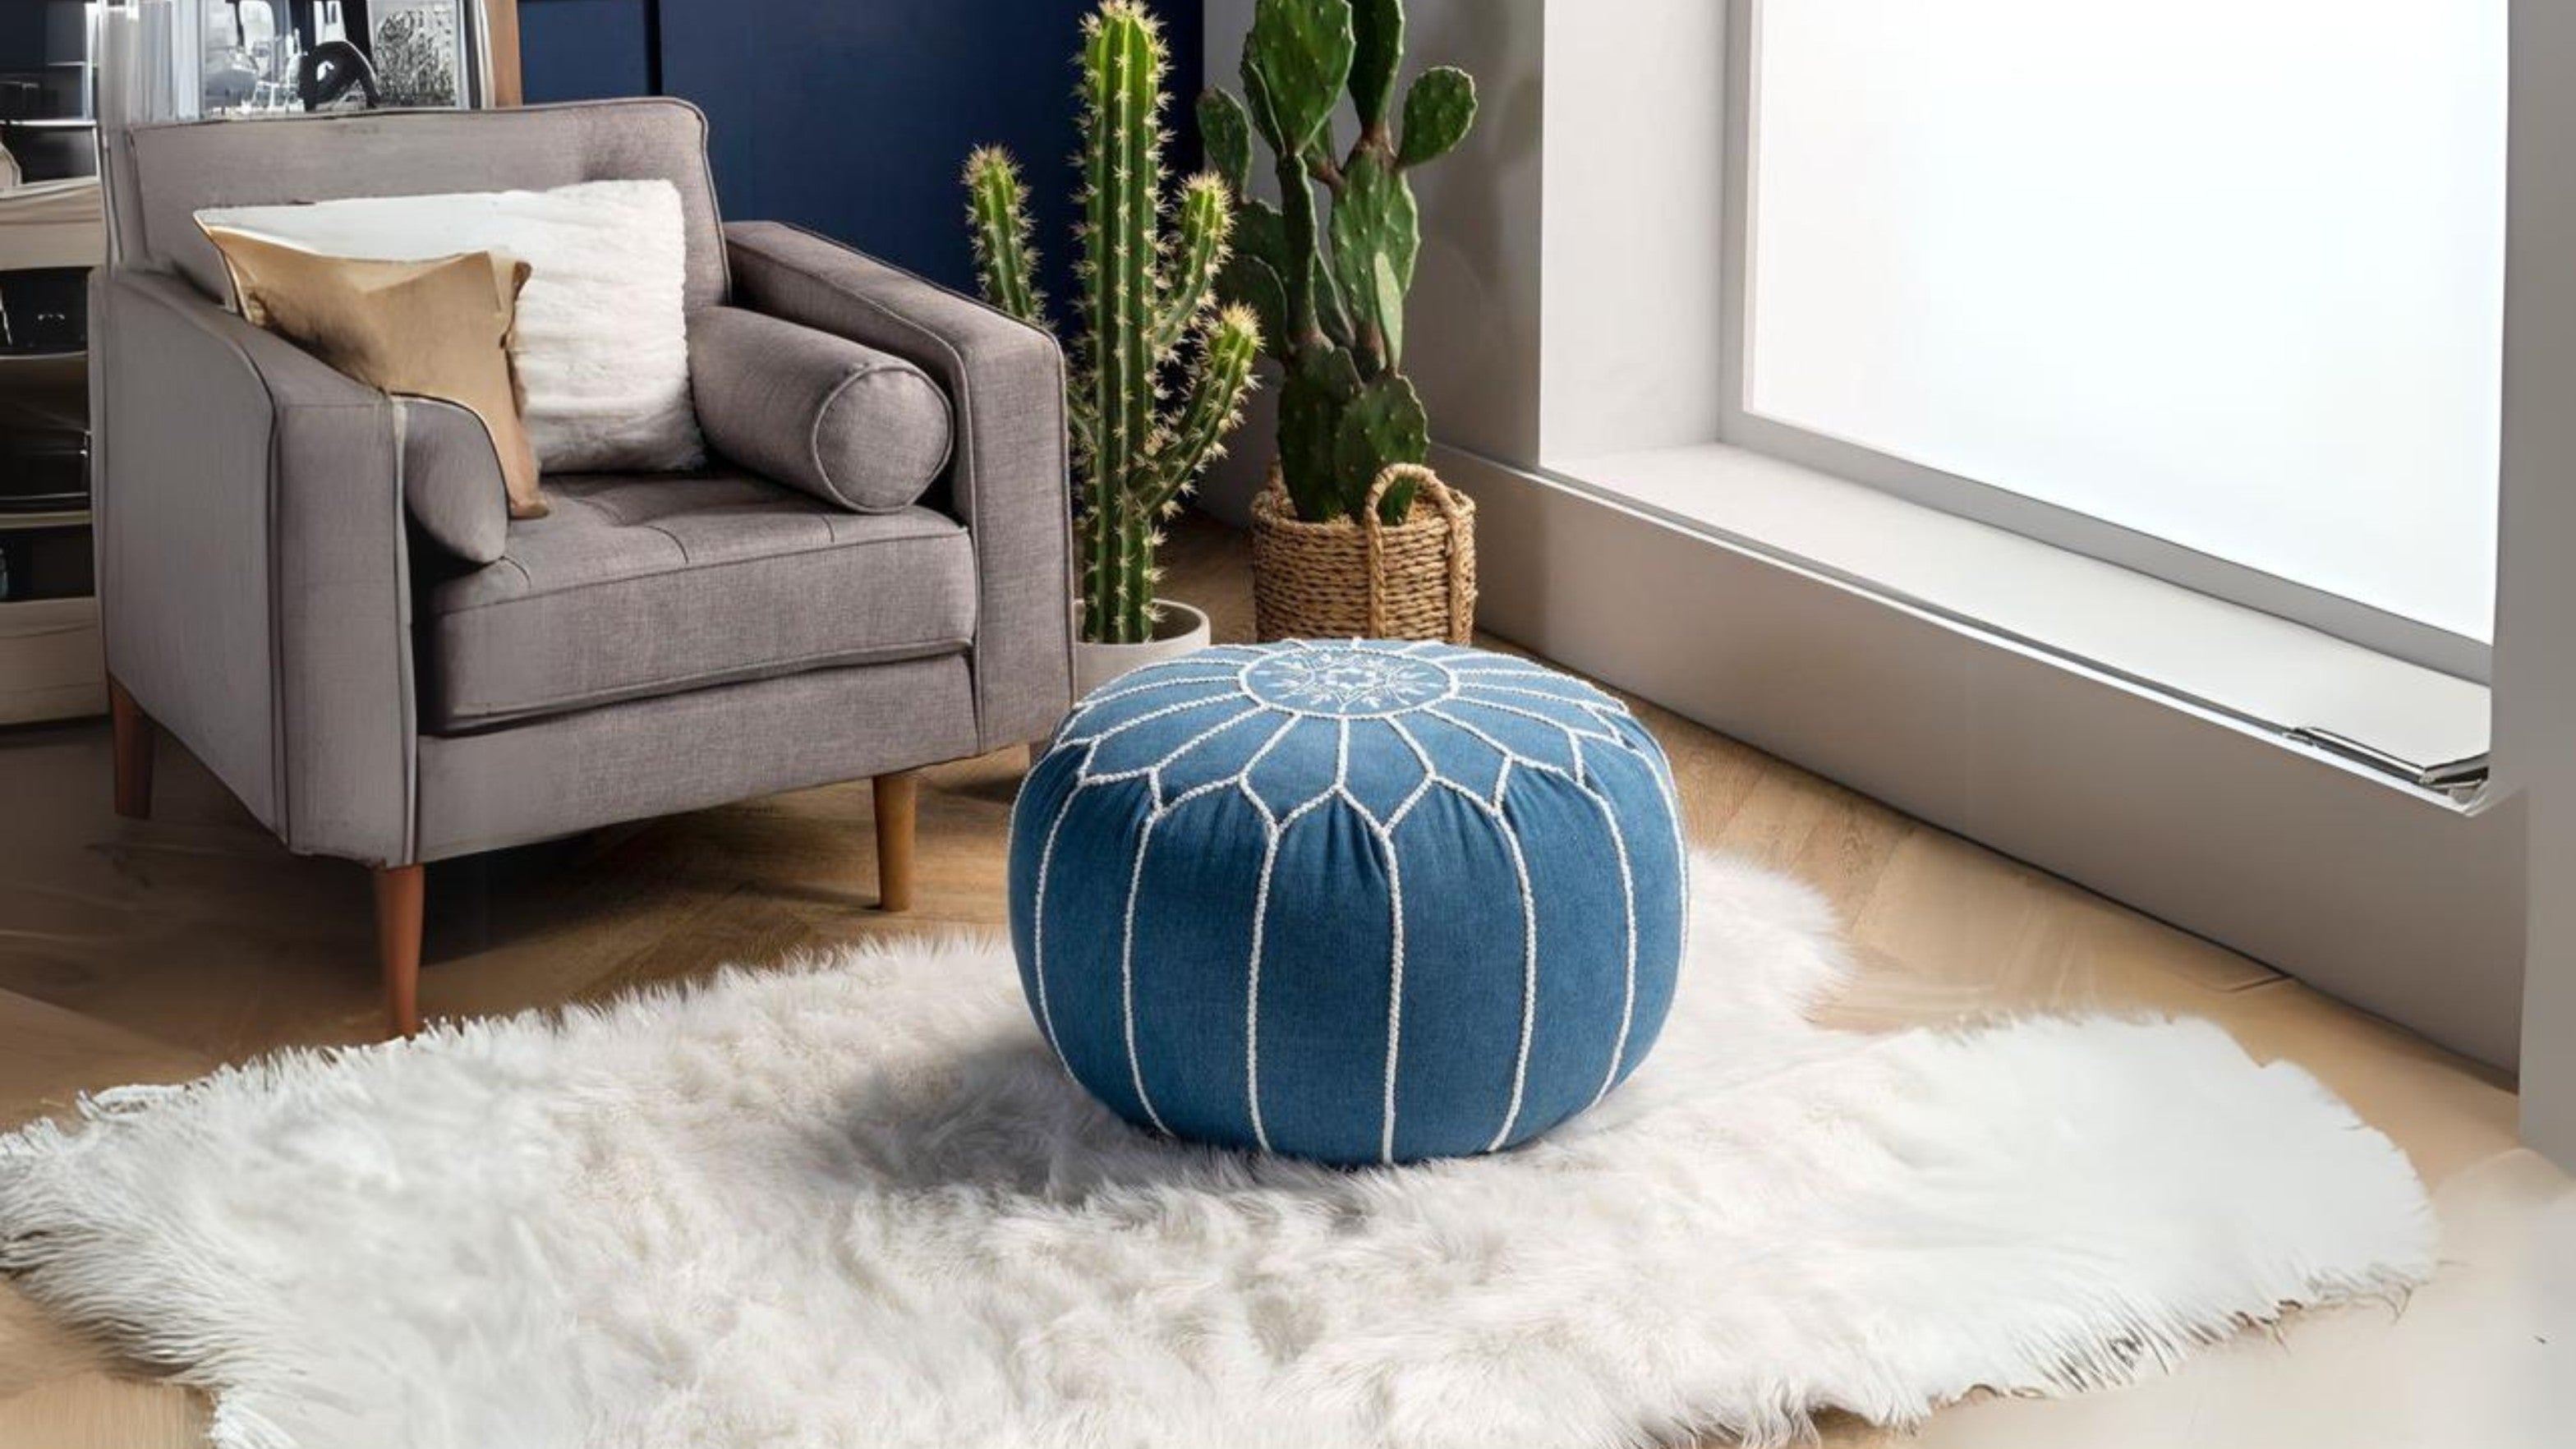 mypoufs header showing a moroccan seating with a blue moroccan leather pouf